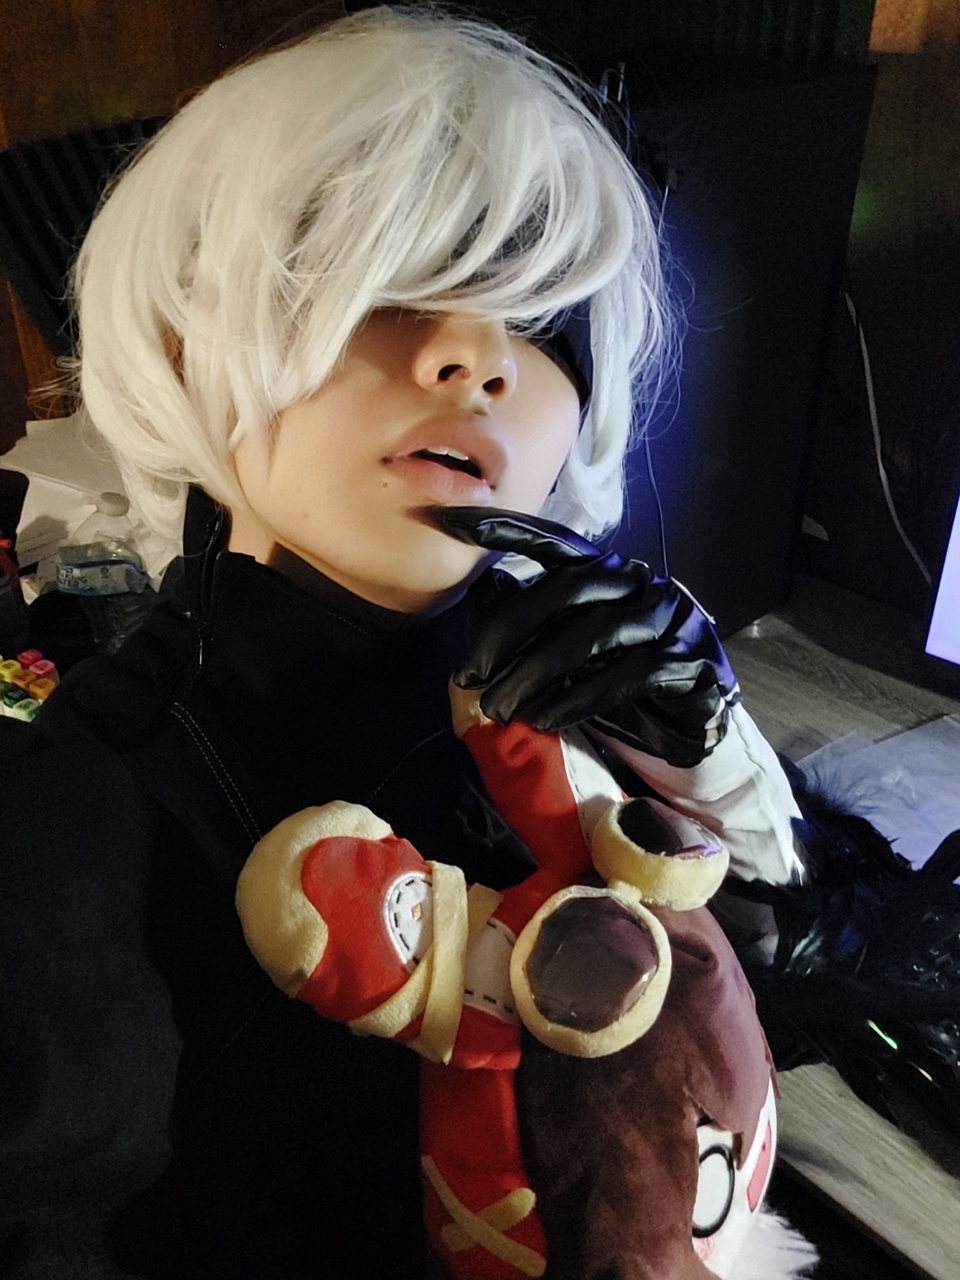 Heres My 2b Cosplay Was A Bit Nervous To Post It But Baron Bunny Gave Me Courage 00